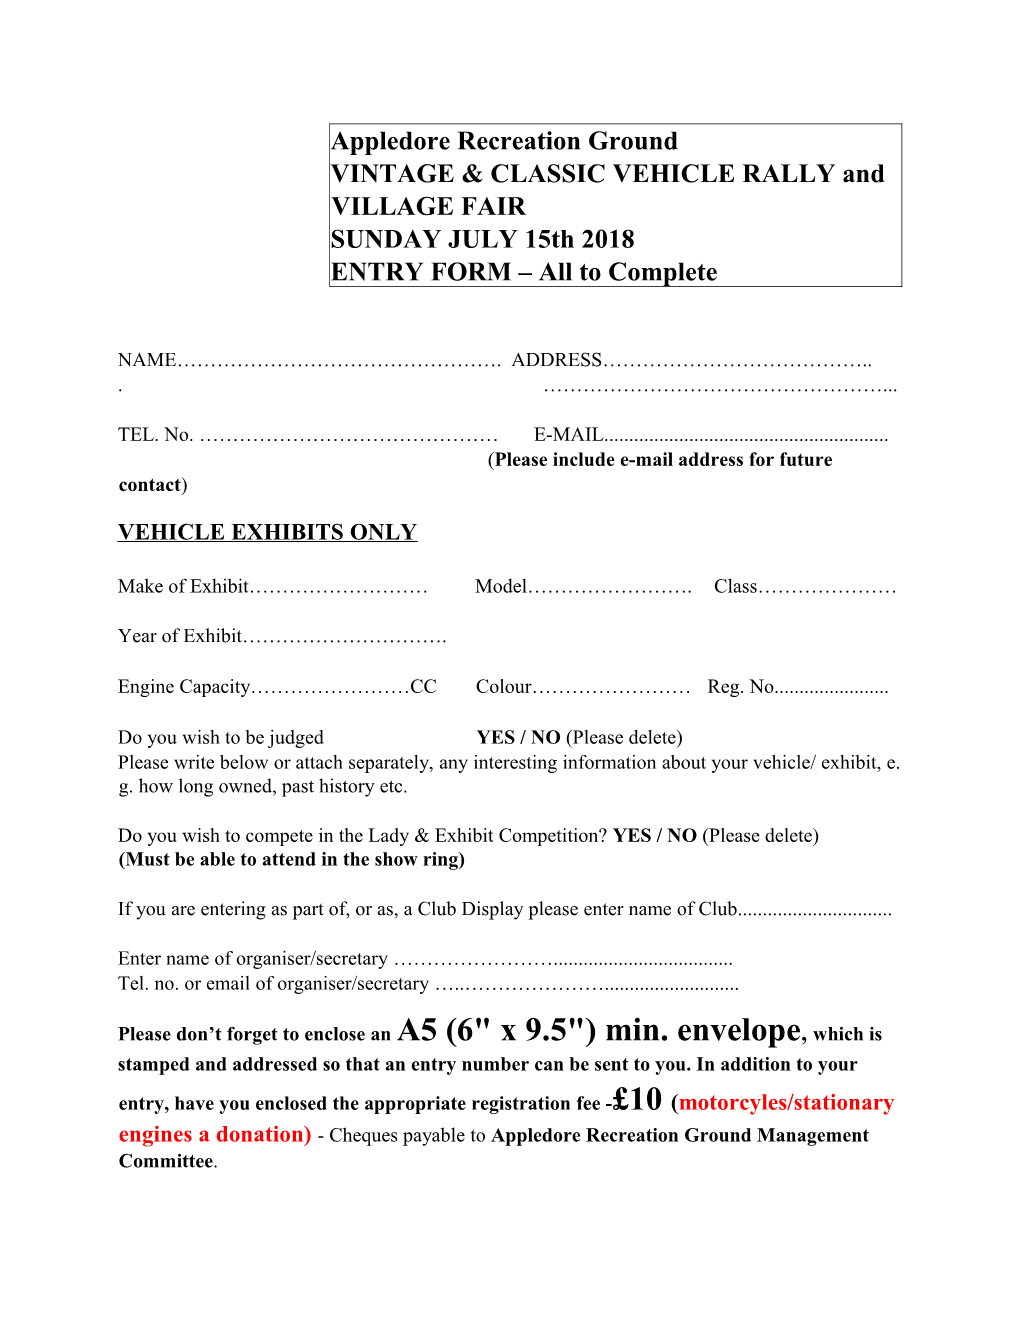 VINTAGE & CLASSIC VEHICLE RALLY and VILLAGE FAIR